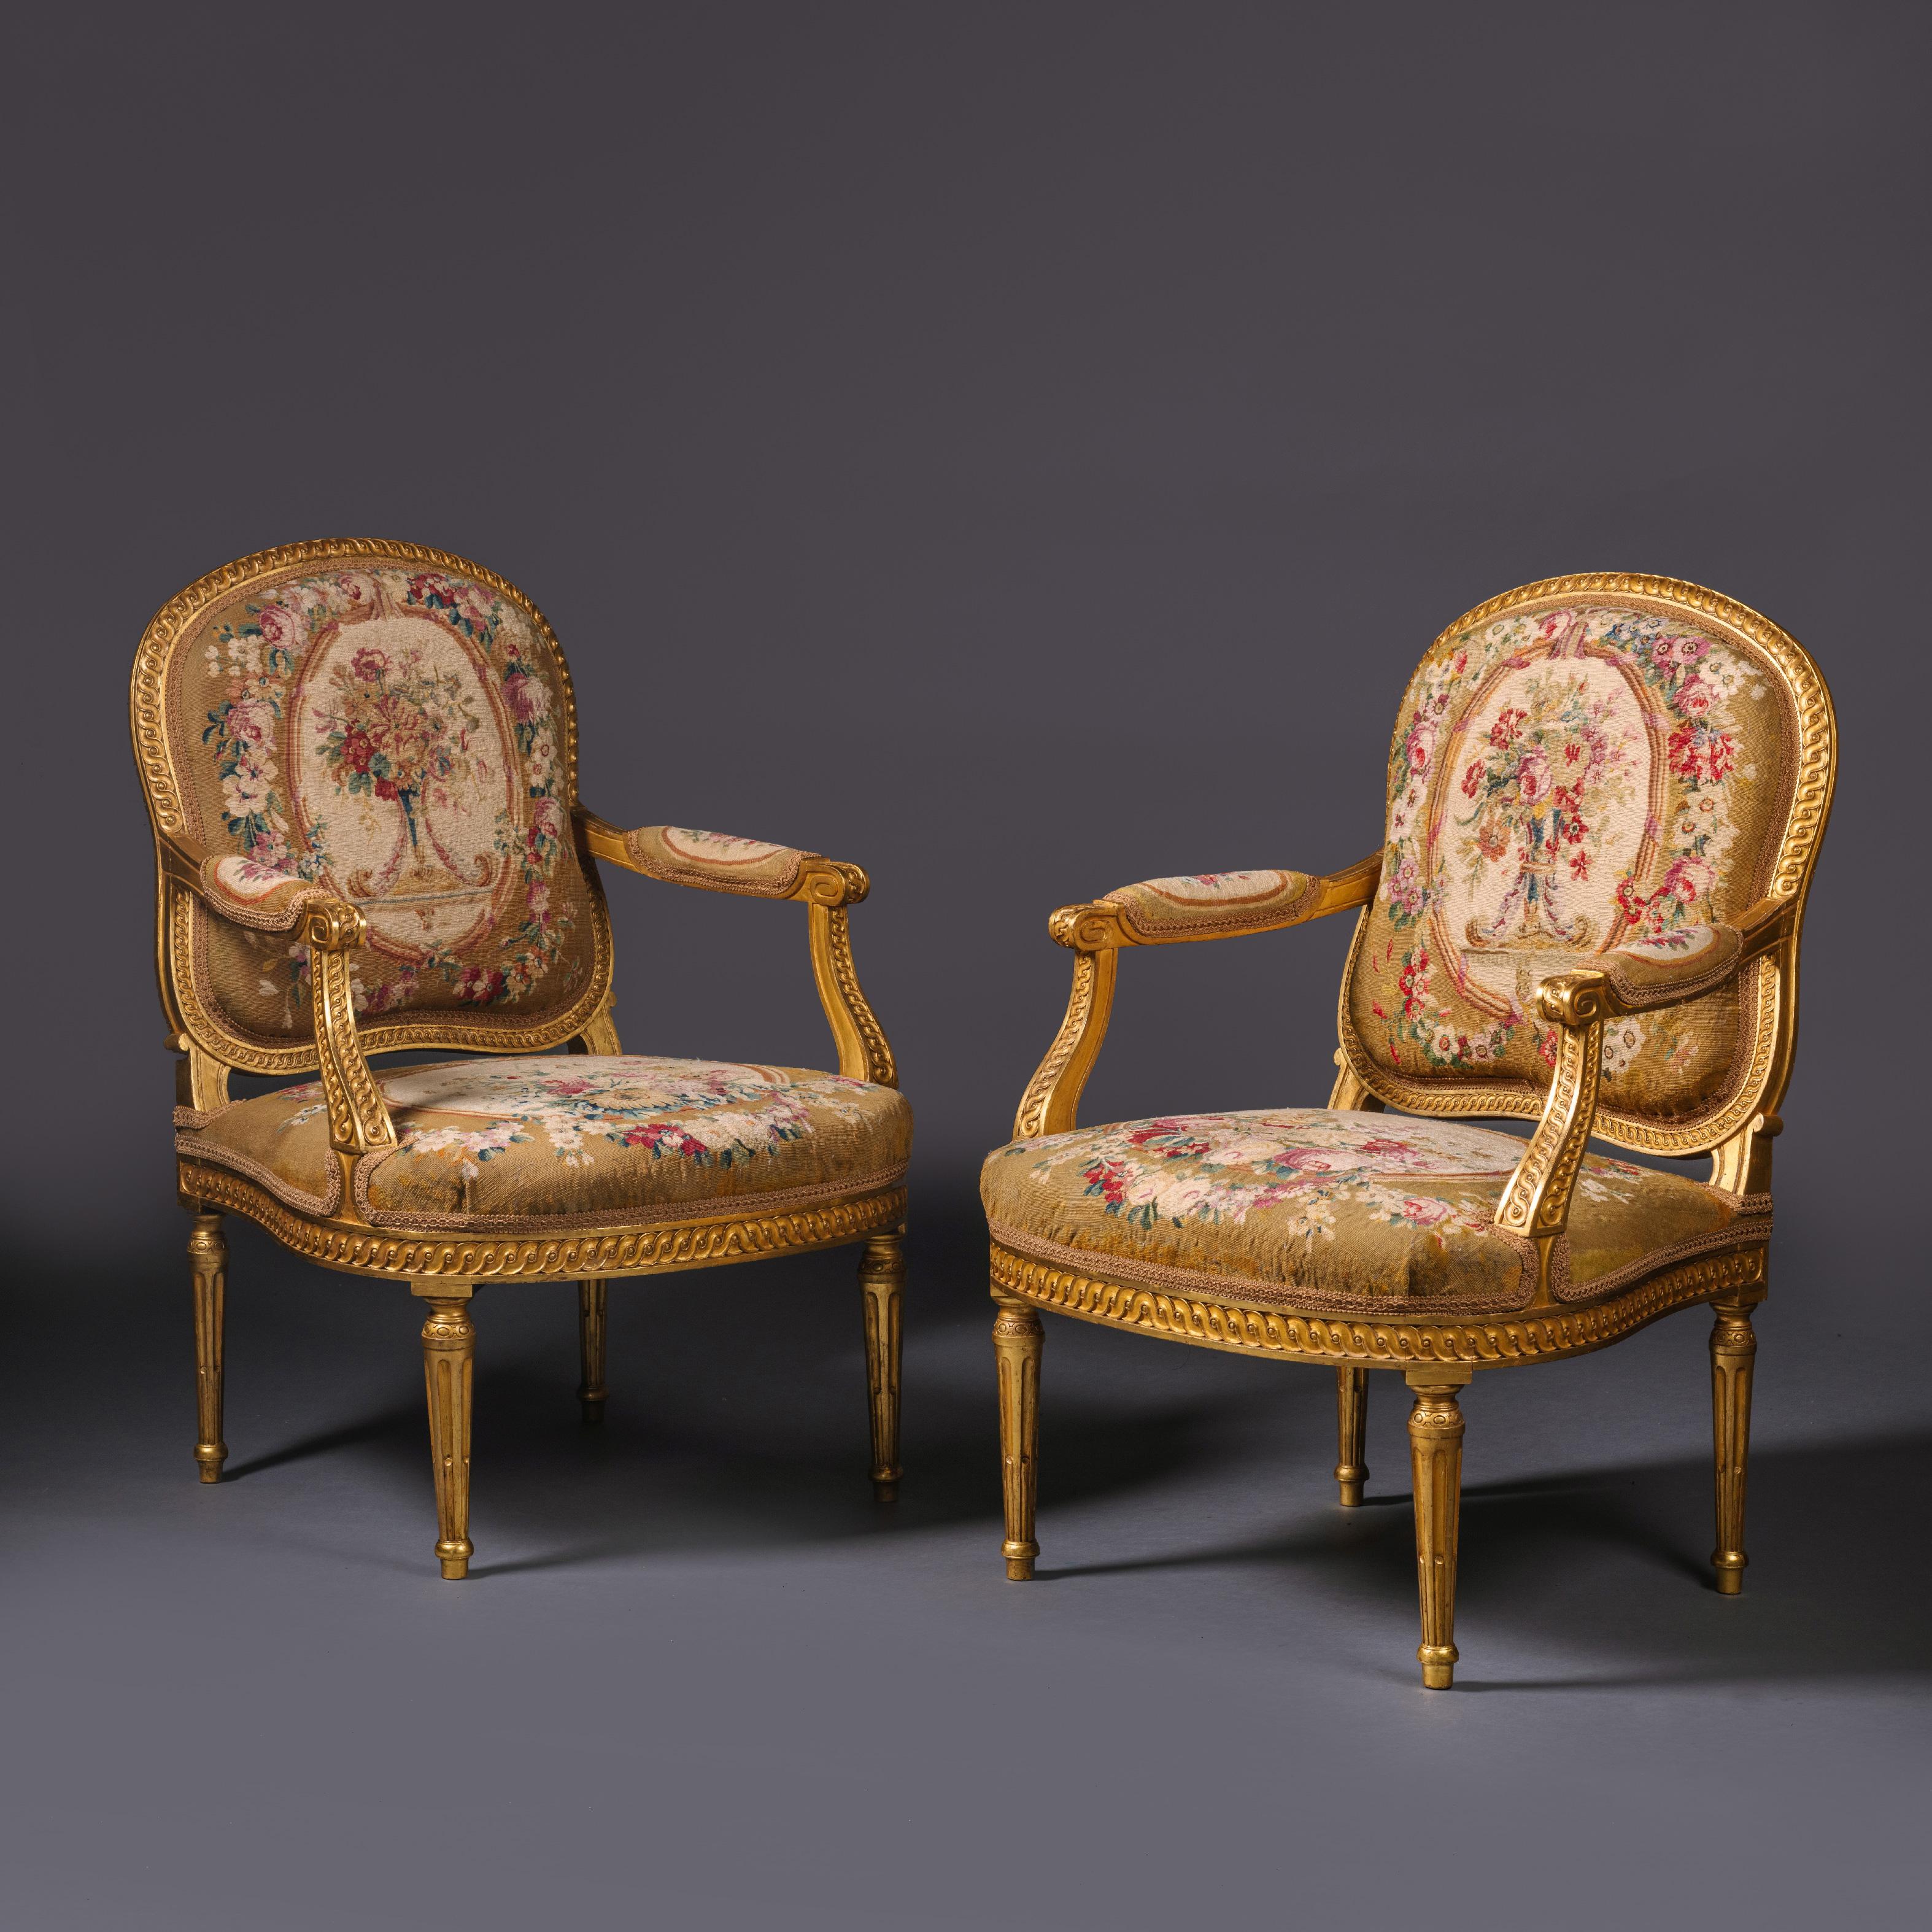 A Pair of Louis XVI Style giltwood and tapestry fauteuils.

The tapestry 18th century and attributed to the Beauvais Manufactory. The frames are finely carved with guilloche banding. The rounded back is upholstered in pale yellow coloured tapestry